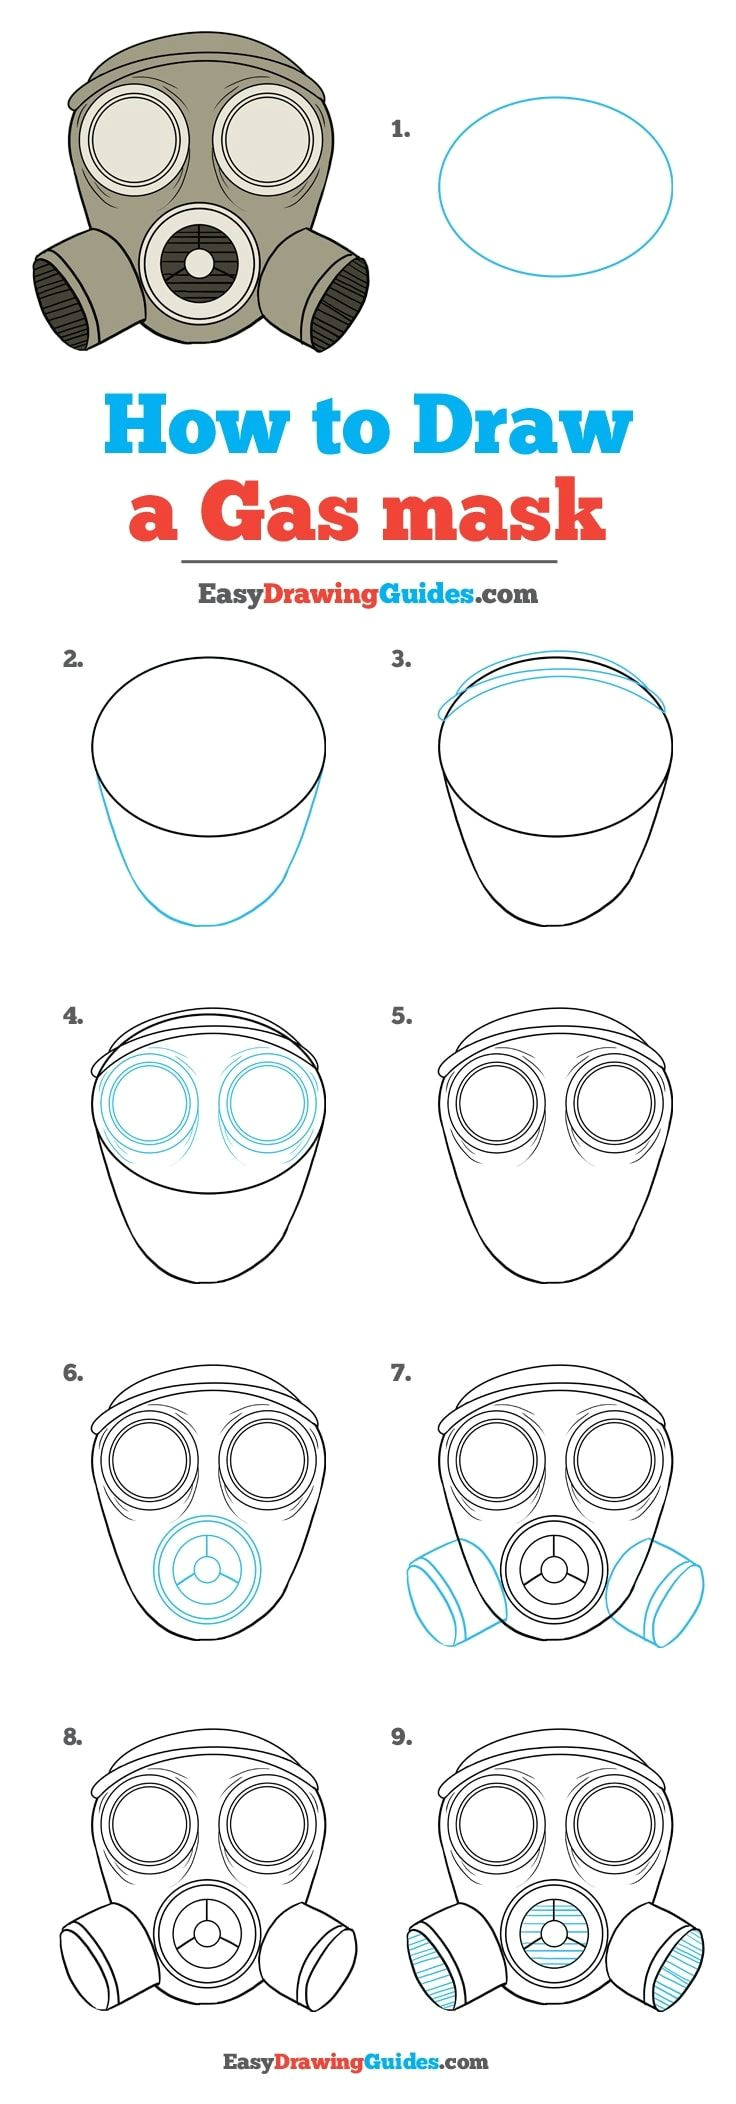 how to draw a gas mask really easy drawing tutorial iphone wallz pinterest masking drawings and tutorials